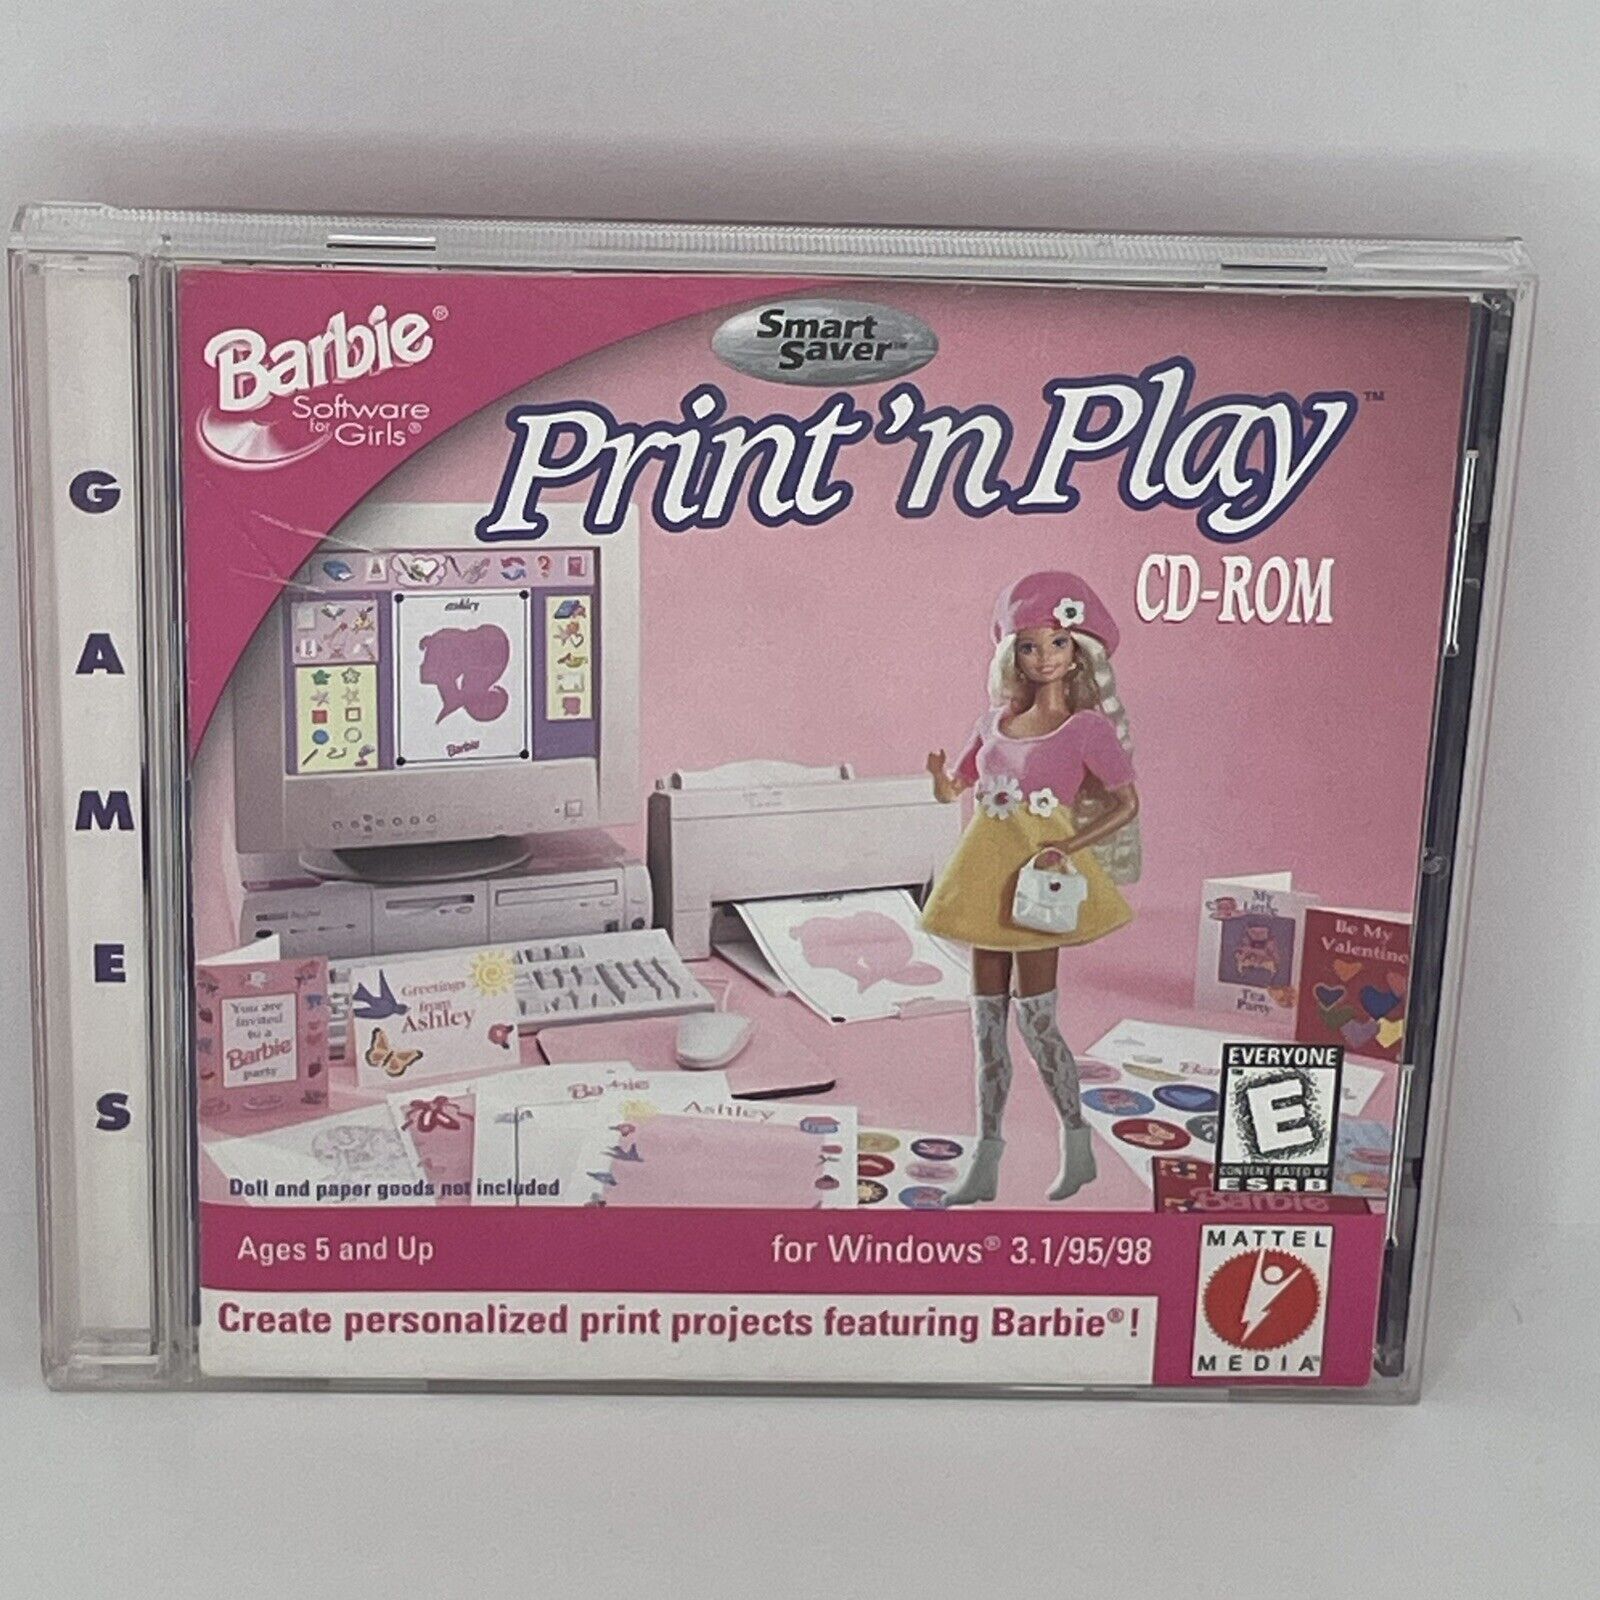 Barbie Software for Girls Print 'n Play CD for Windows 3.1/95/98